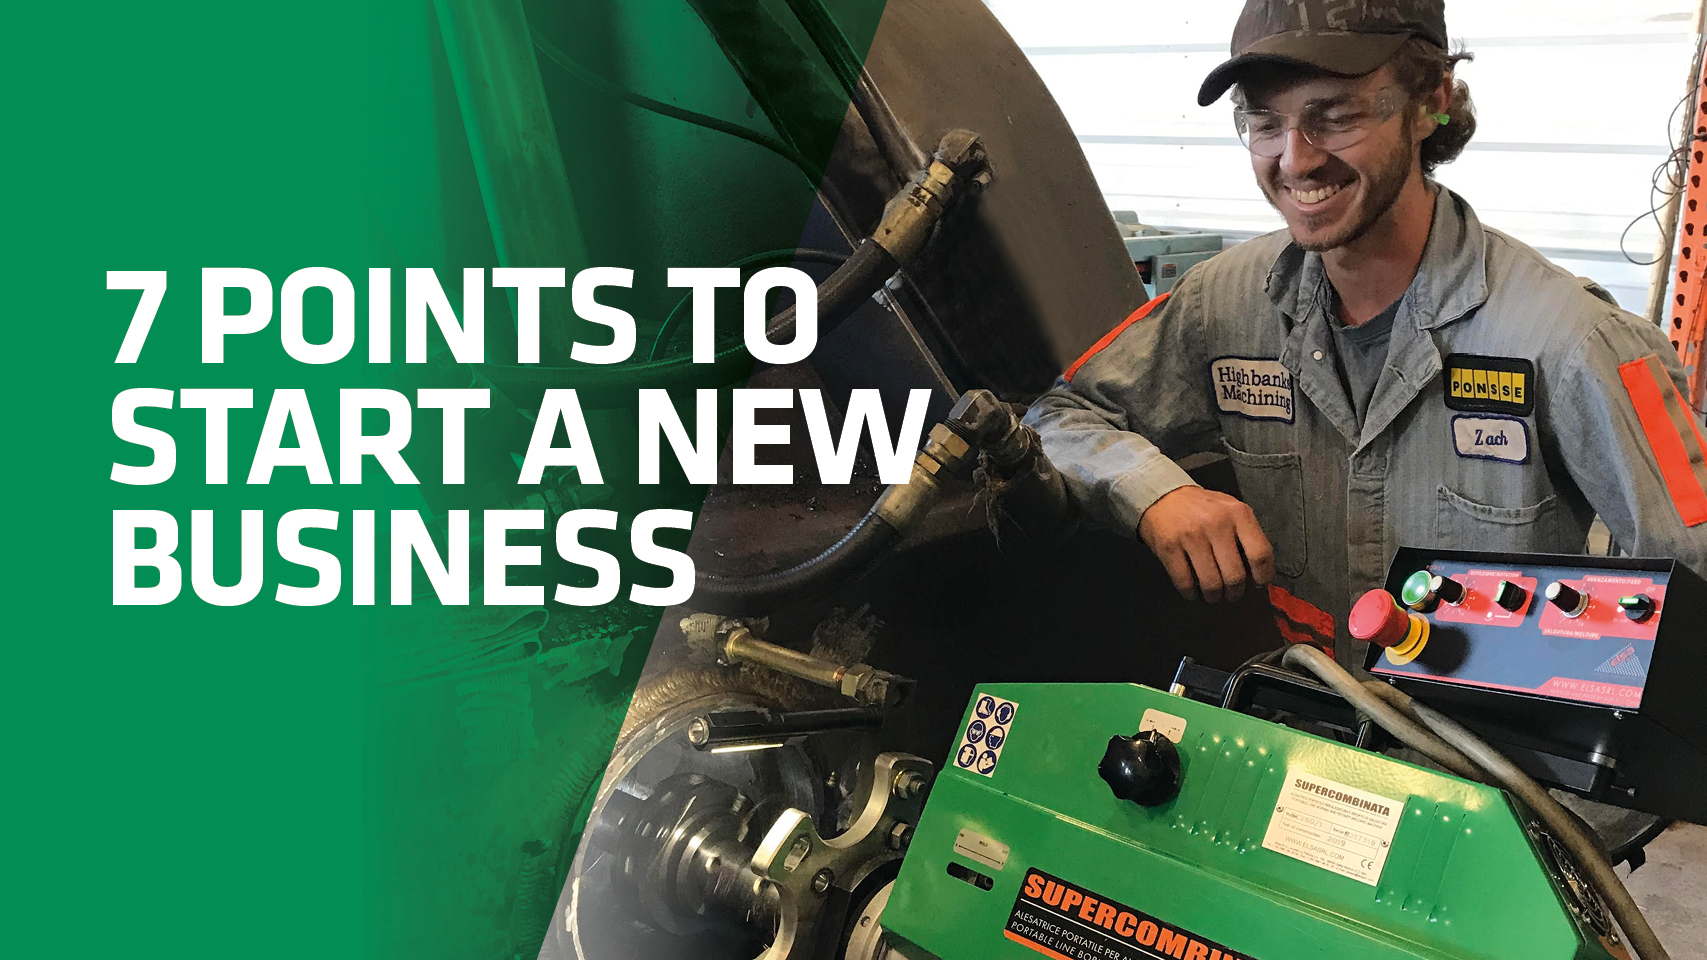 Portable line boring machines: 7 points to start a new business